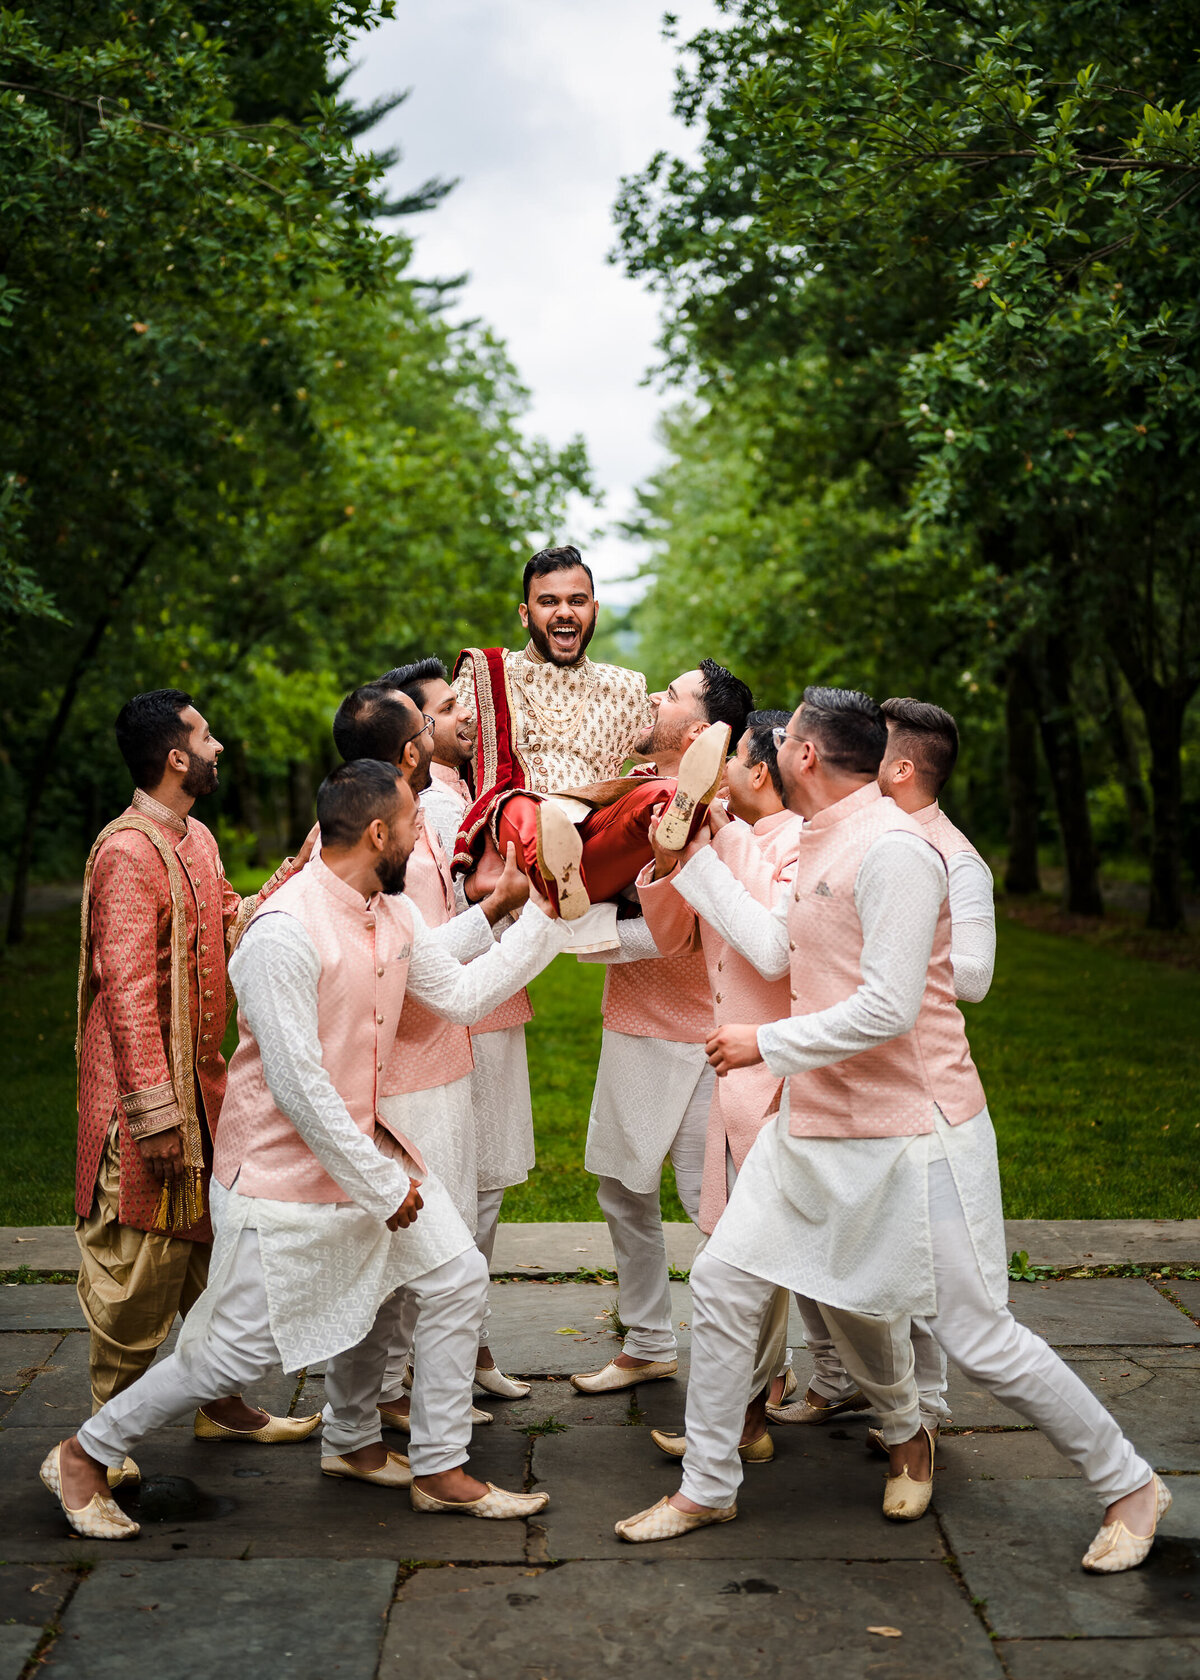 Discover New Jersey's premier luxury Indian wedding vendors. Contact Ishan Fotografi for more information.